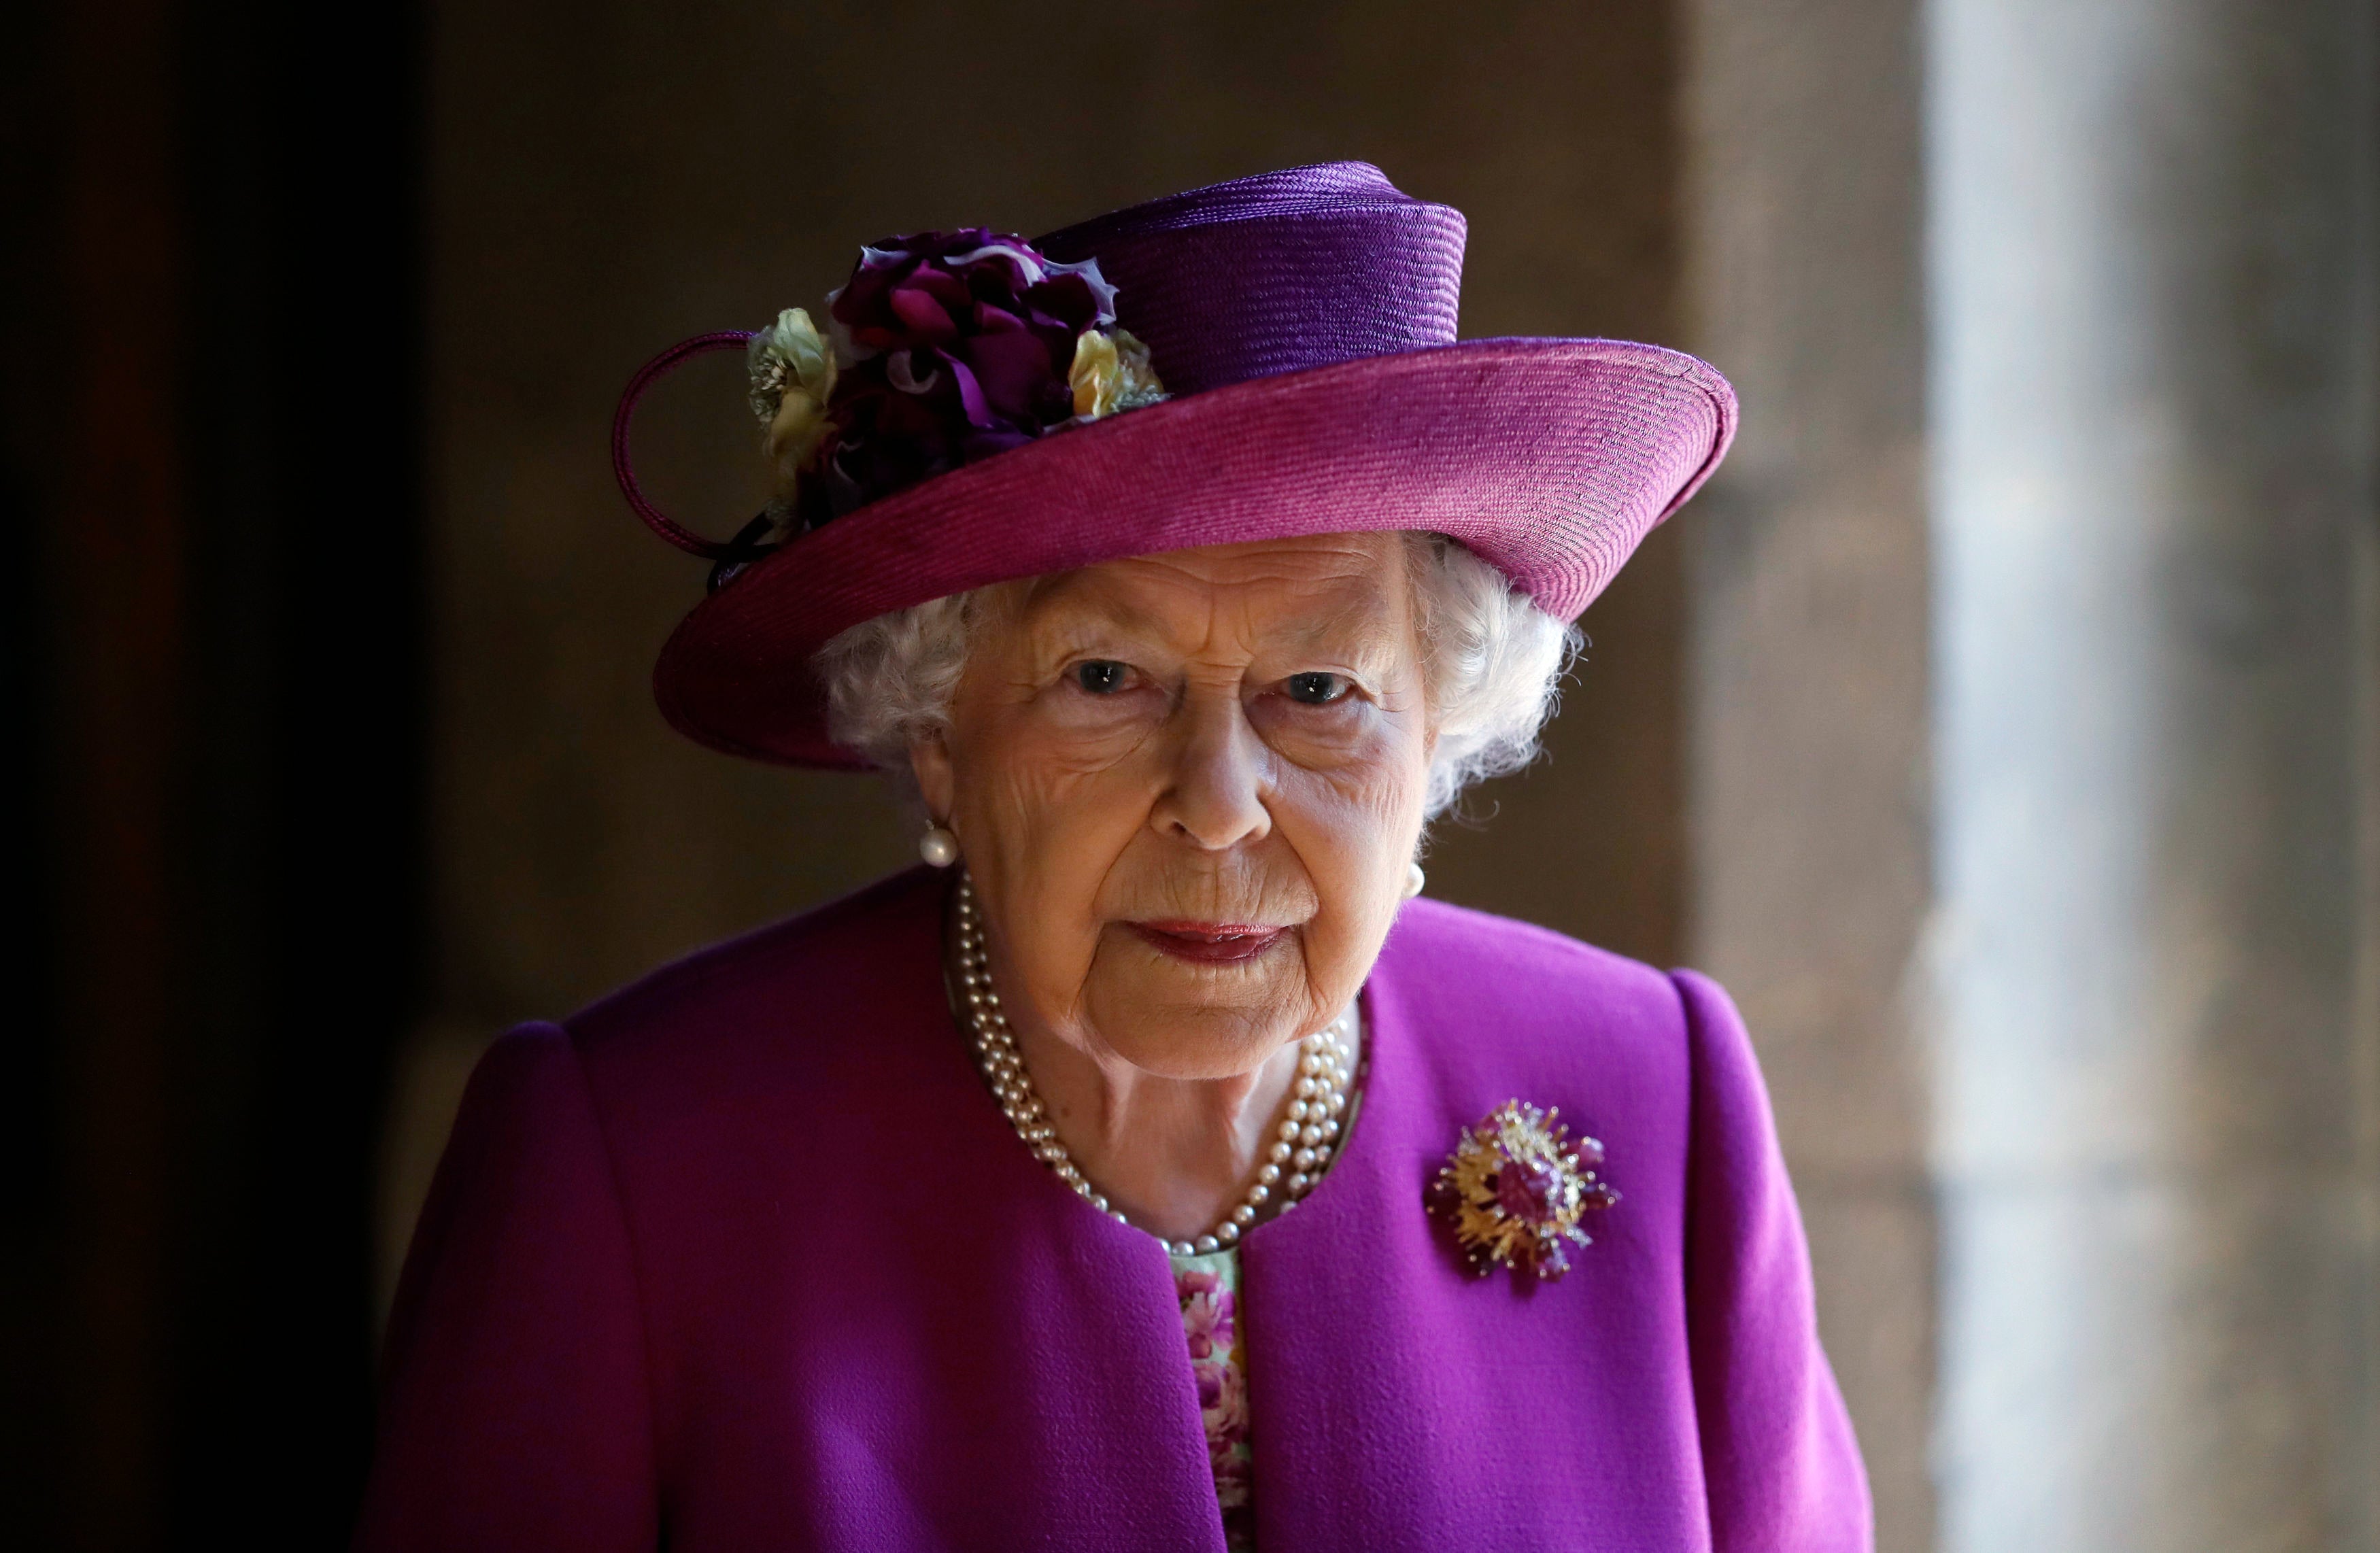 The Queen has been given advice from doctors to rest